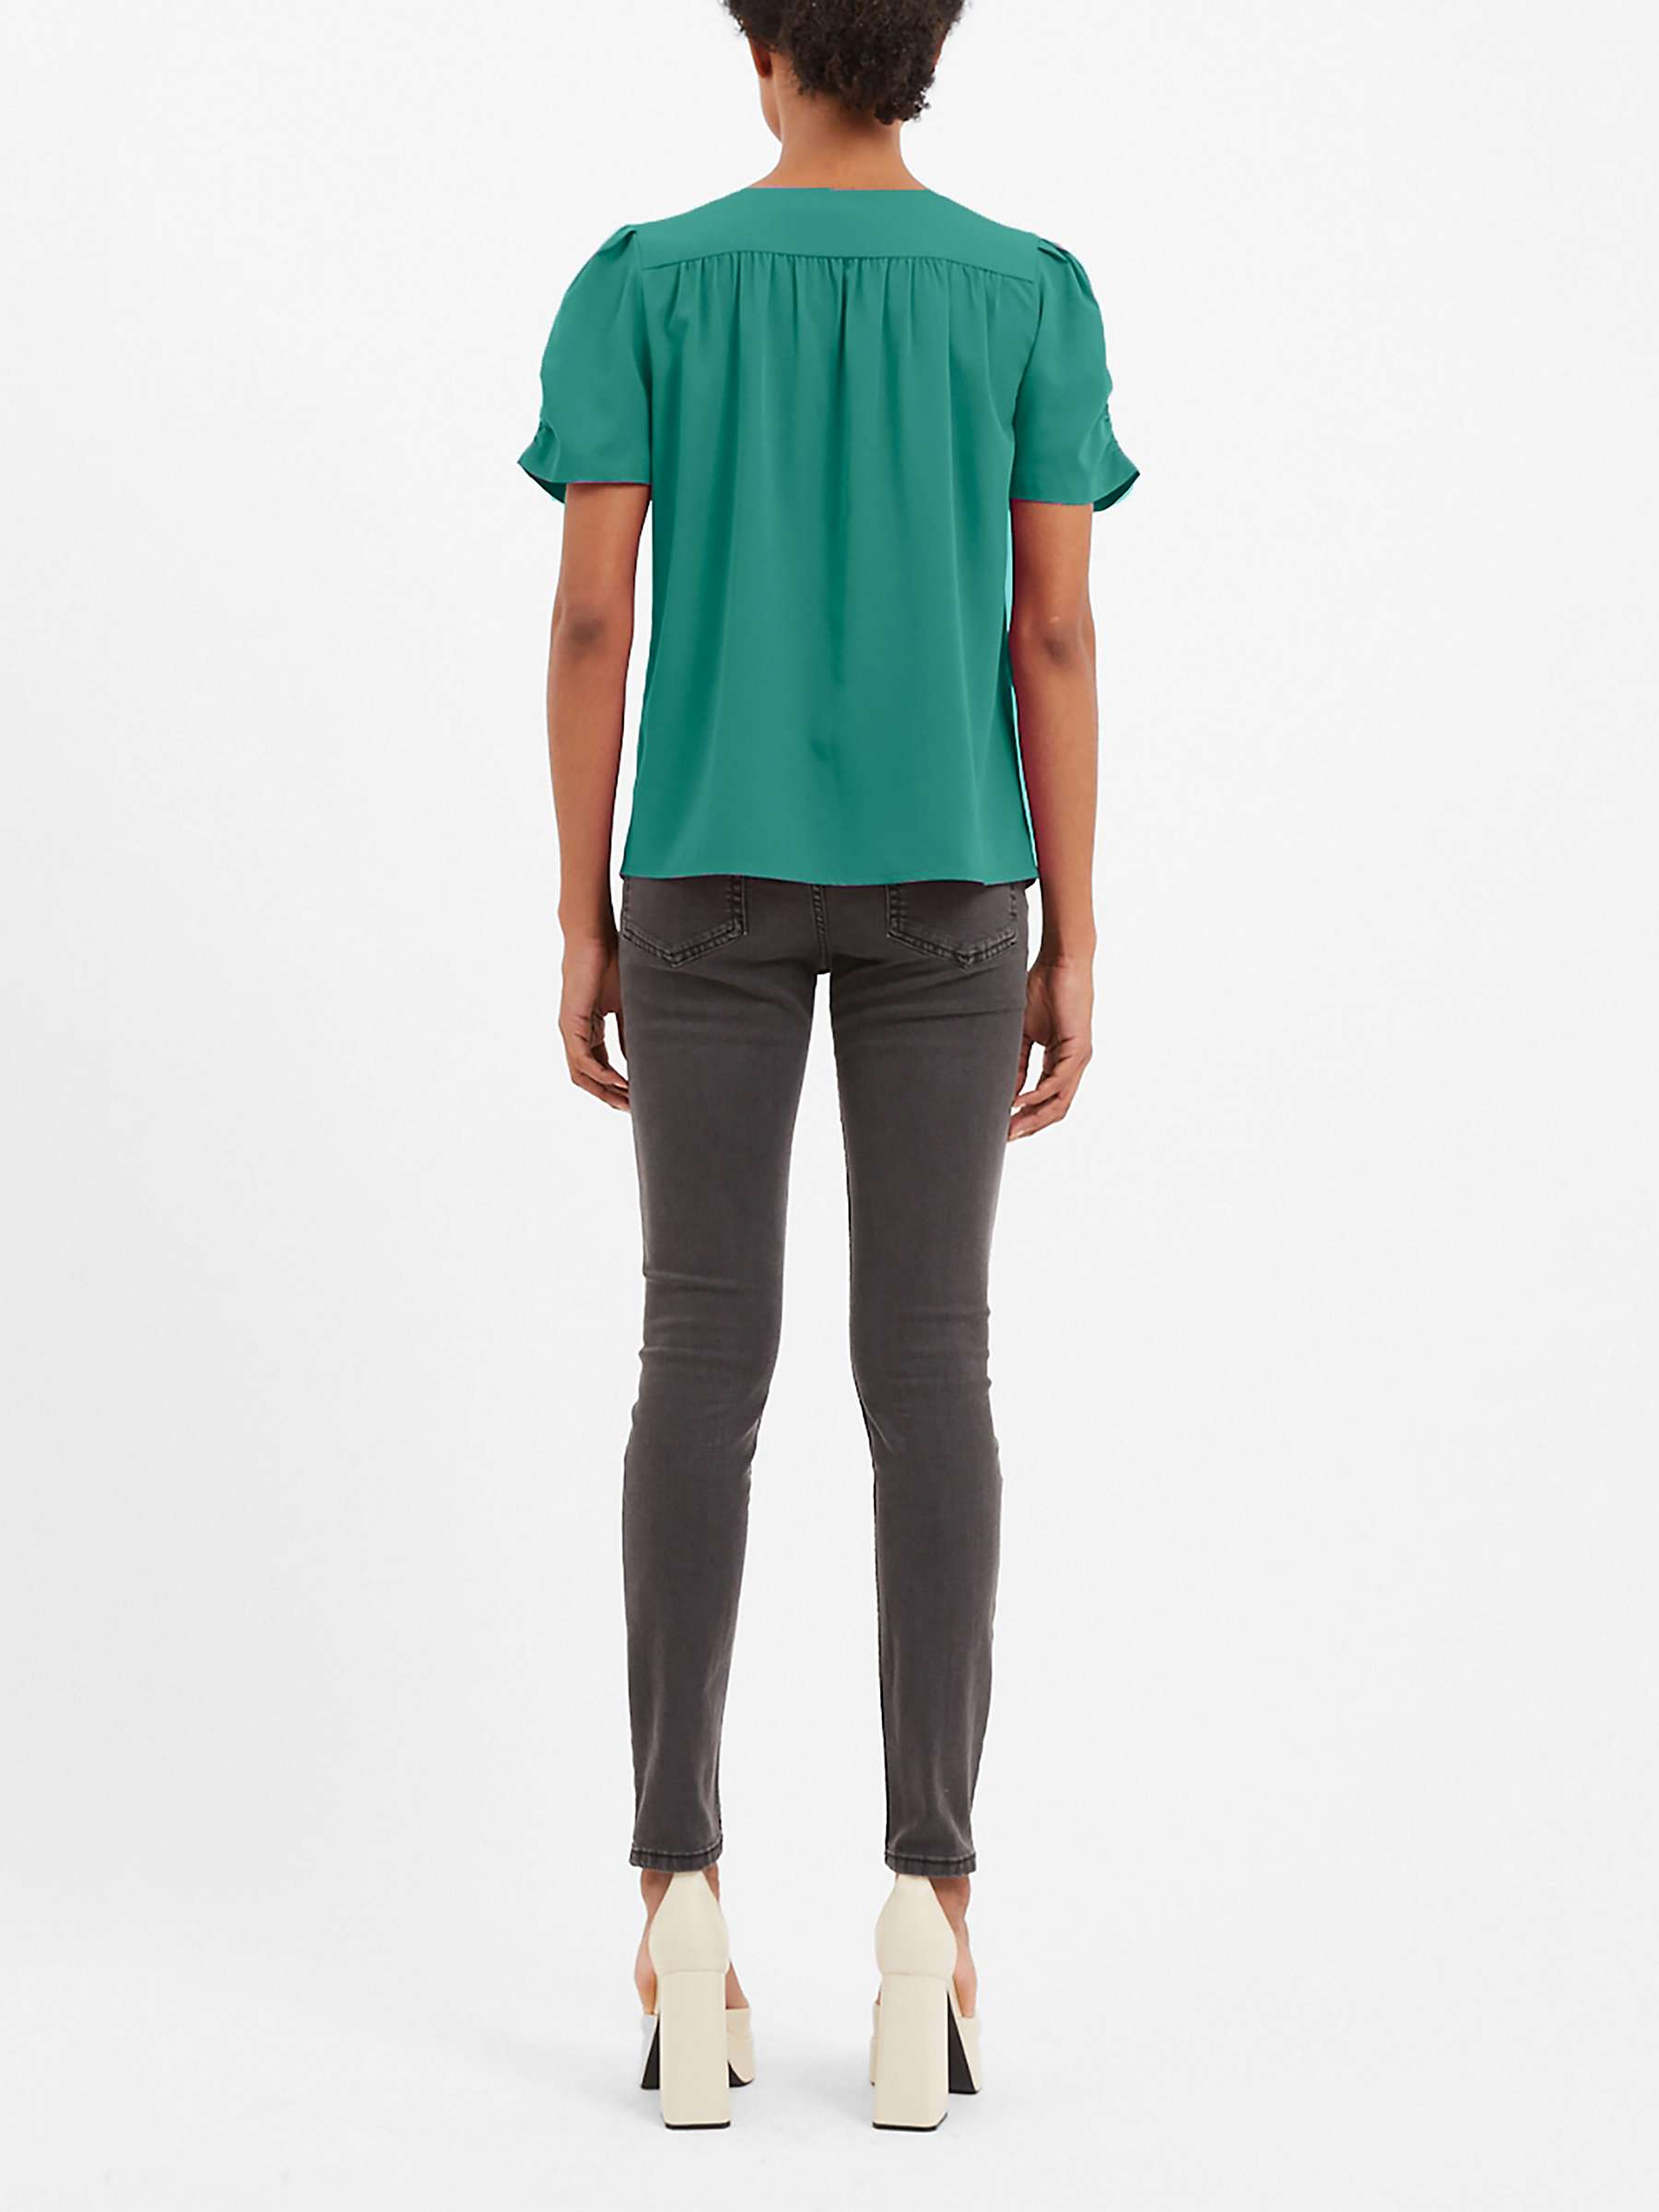 Buy French Connection Light Crepe Top Online at johnlewis.com